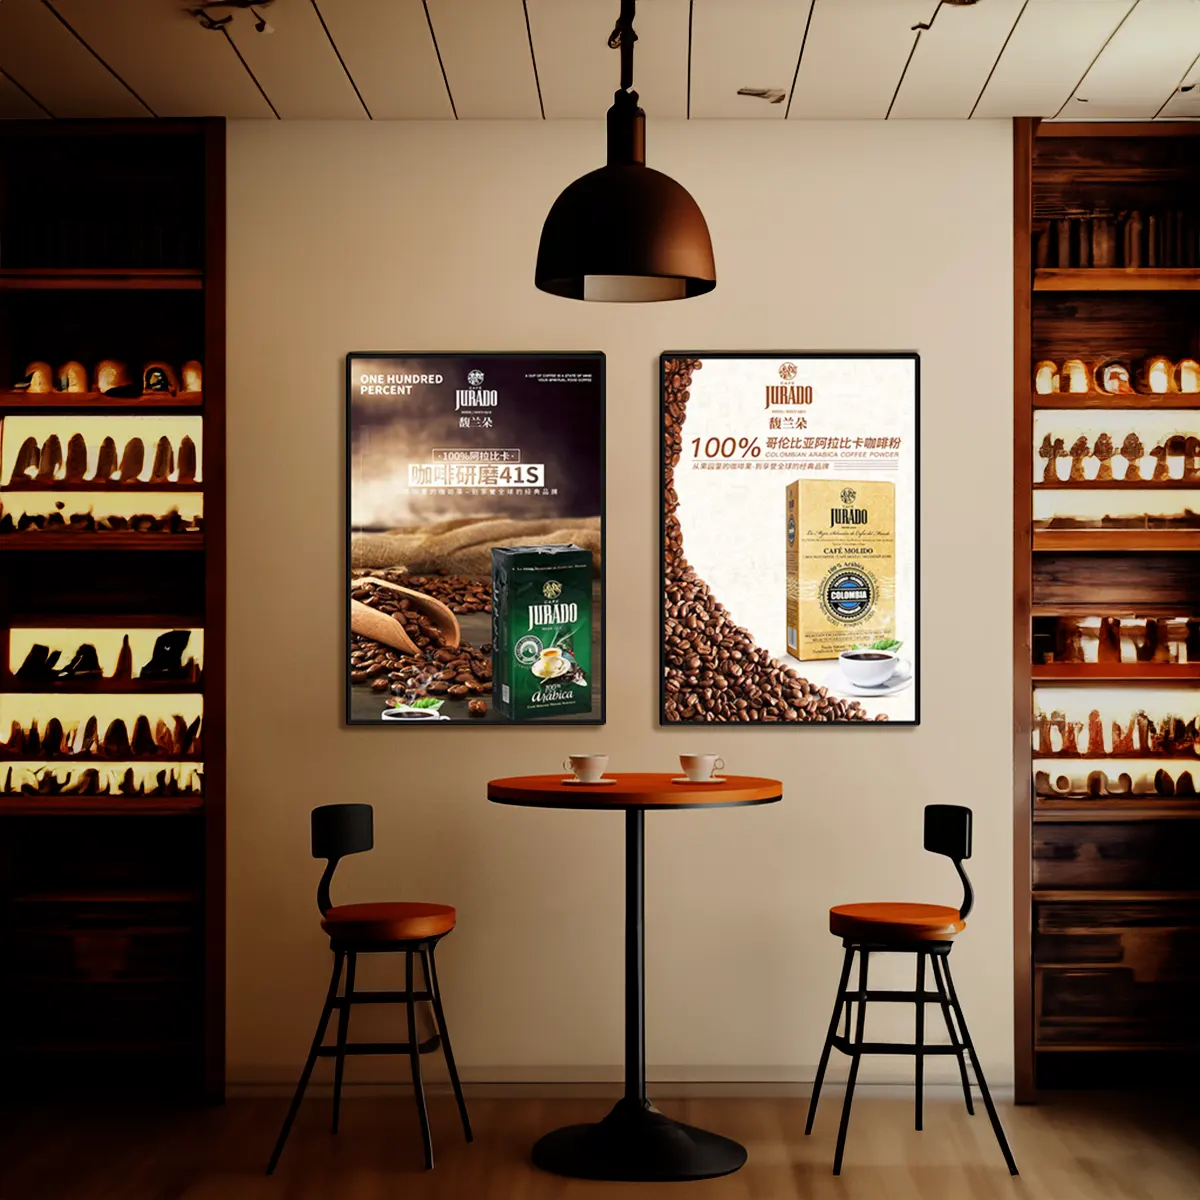 Enhancing coffe Signage with LED Light Poster Frames